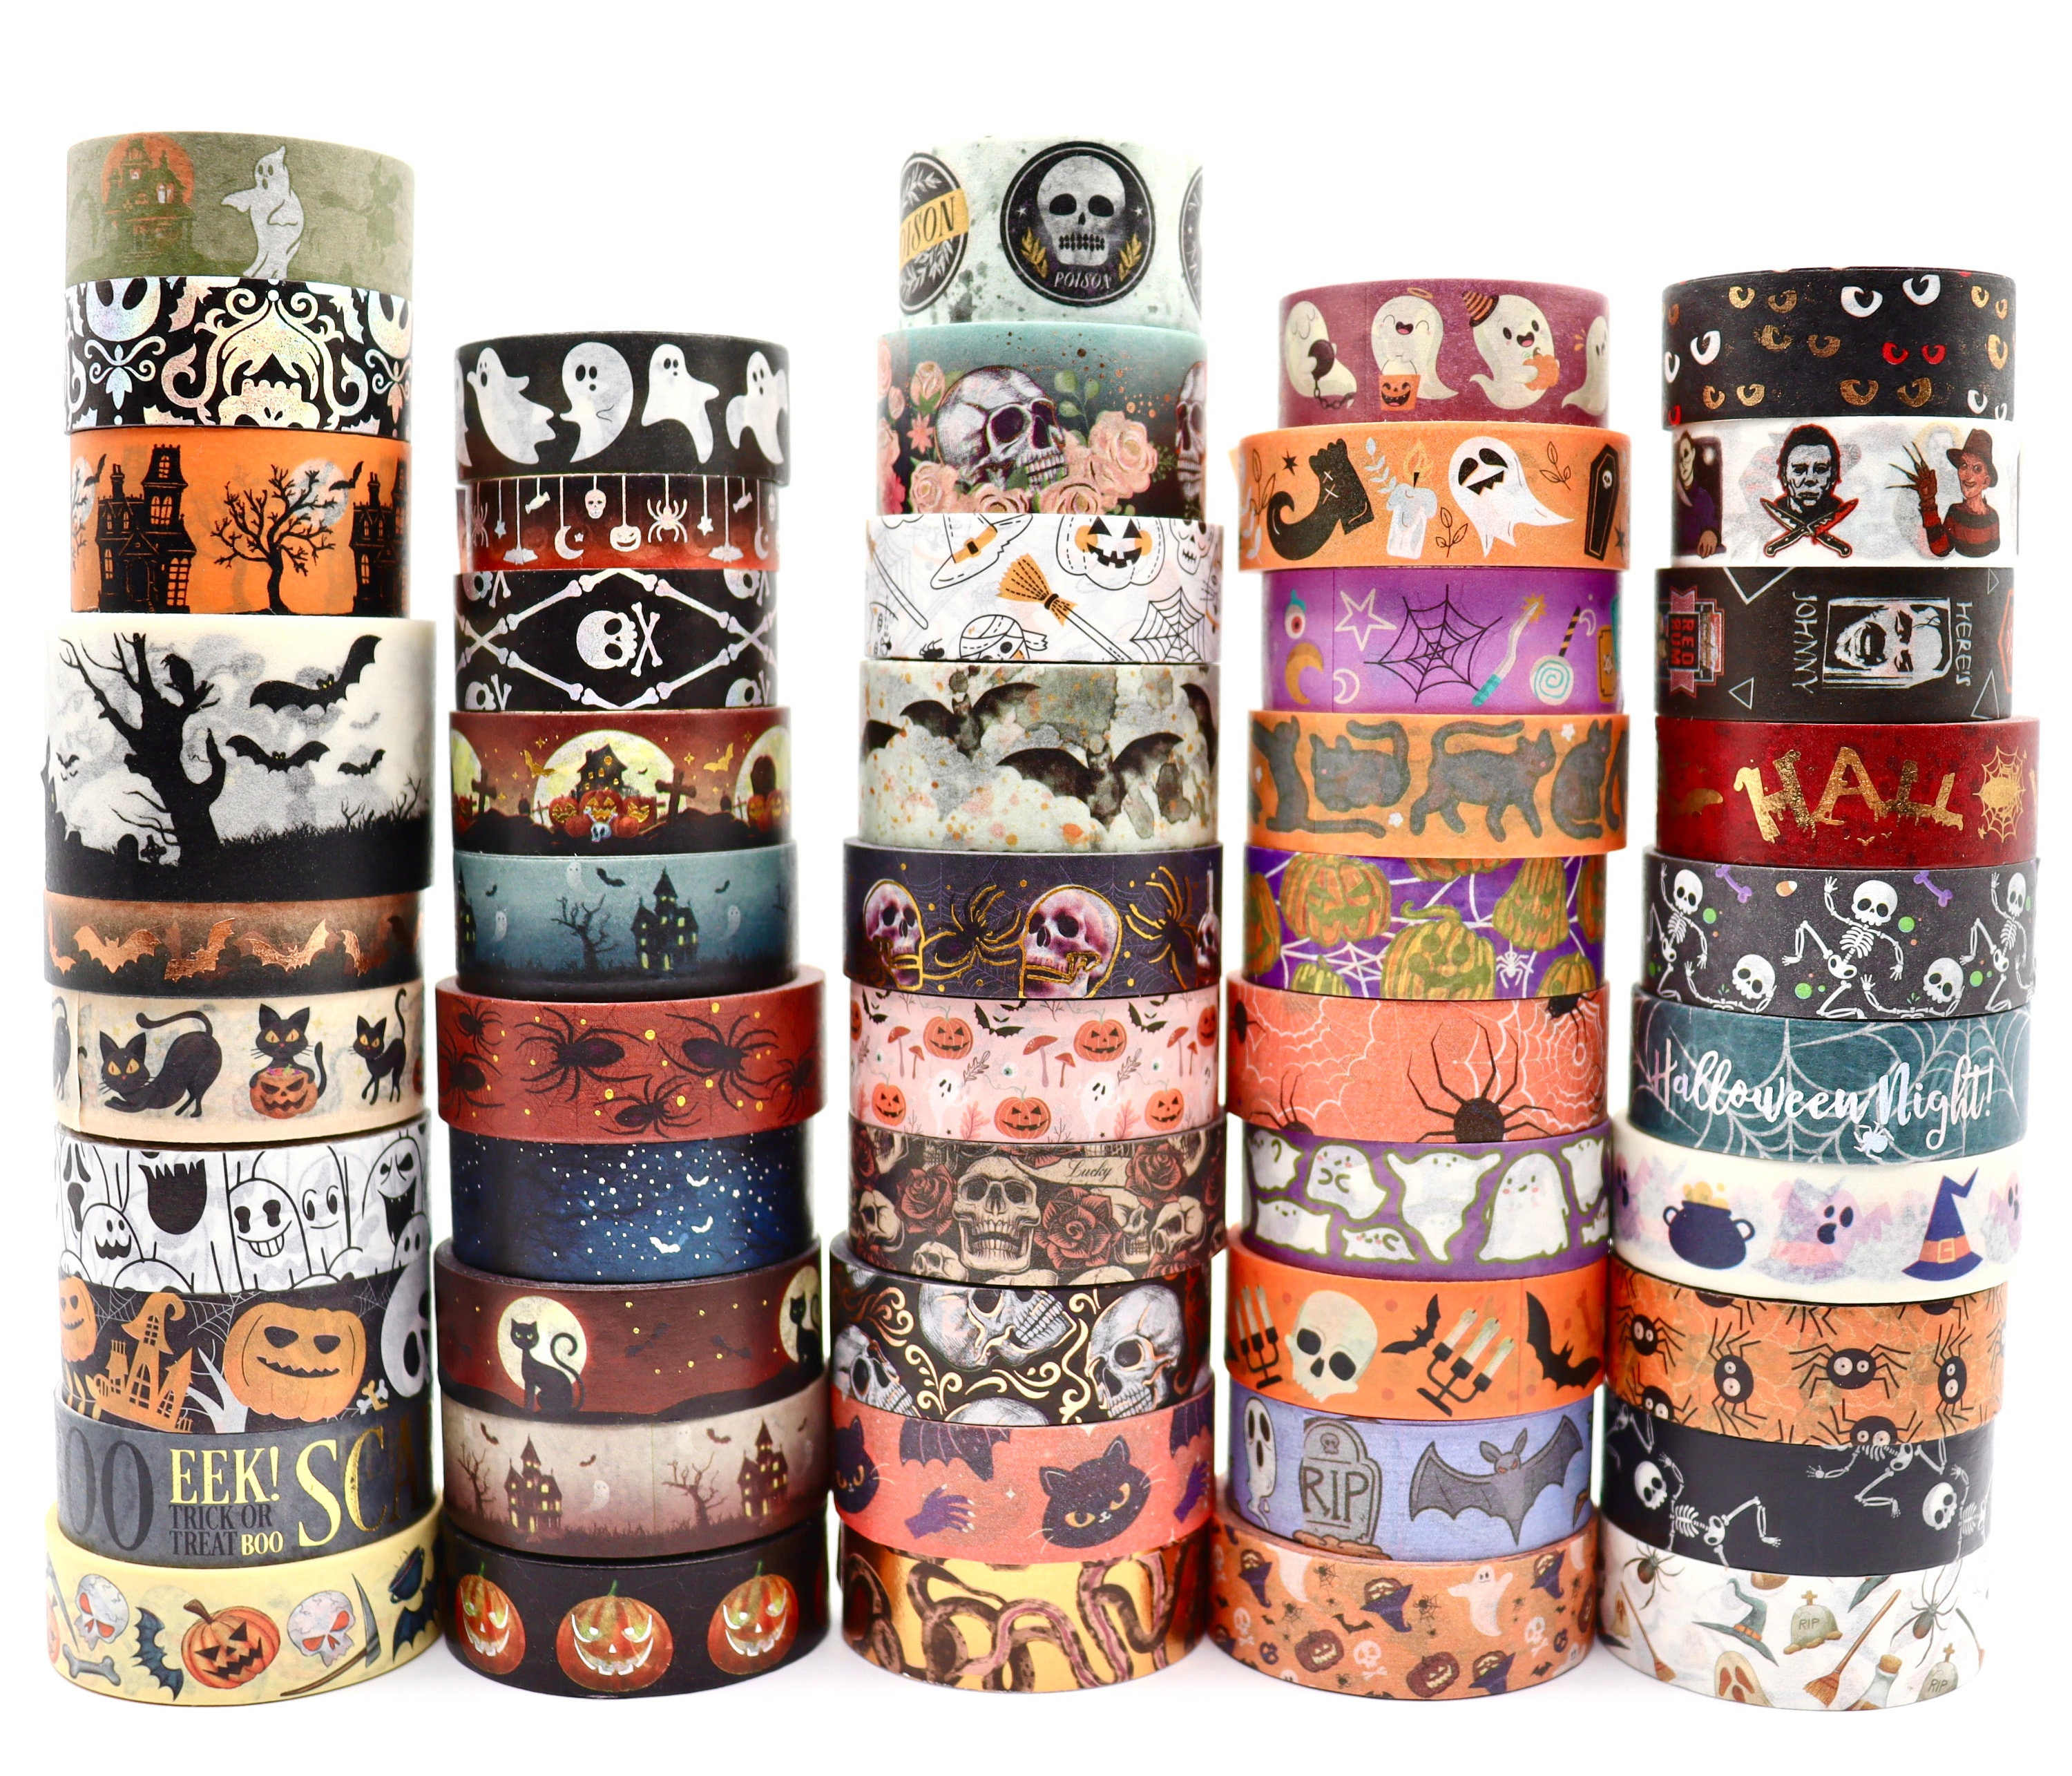 Spooky Halloween Washi Tape Samples Decorative Tape for Crafts Planner  Decorations Journal Embellishments Cute Stationery 1 Meter 